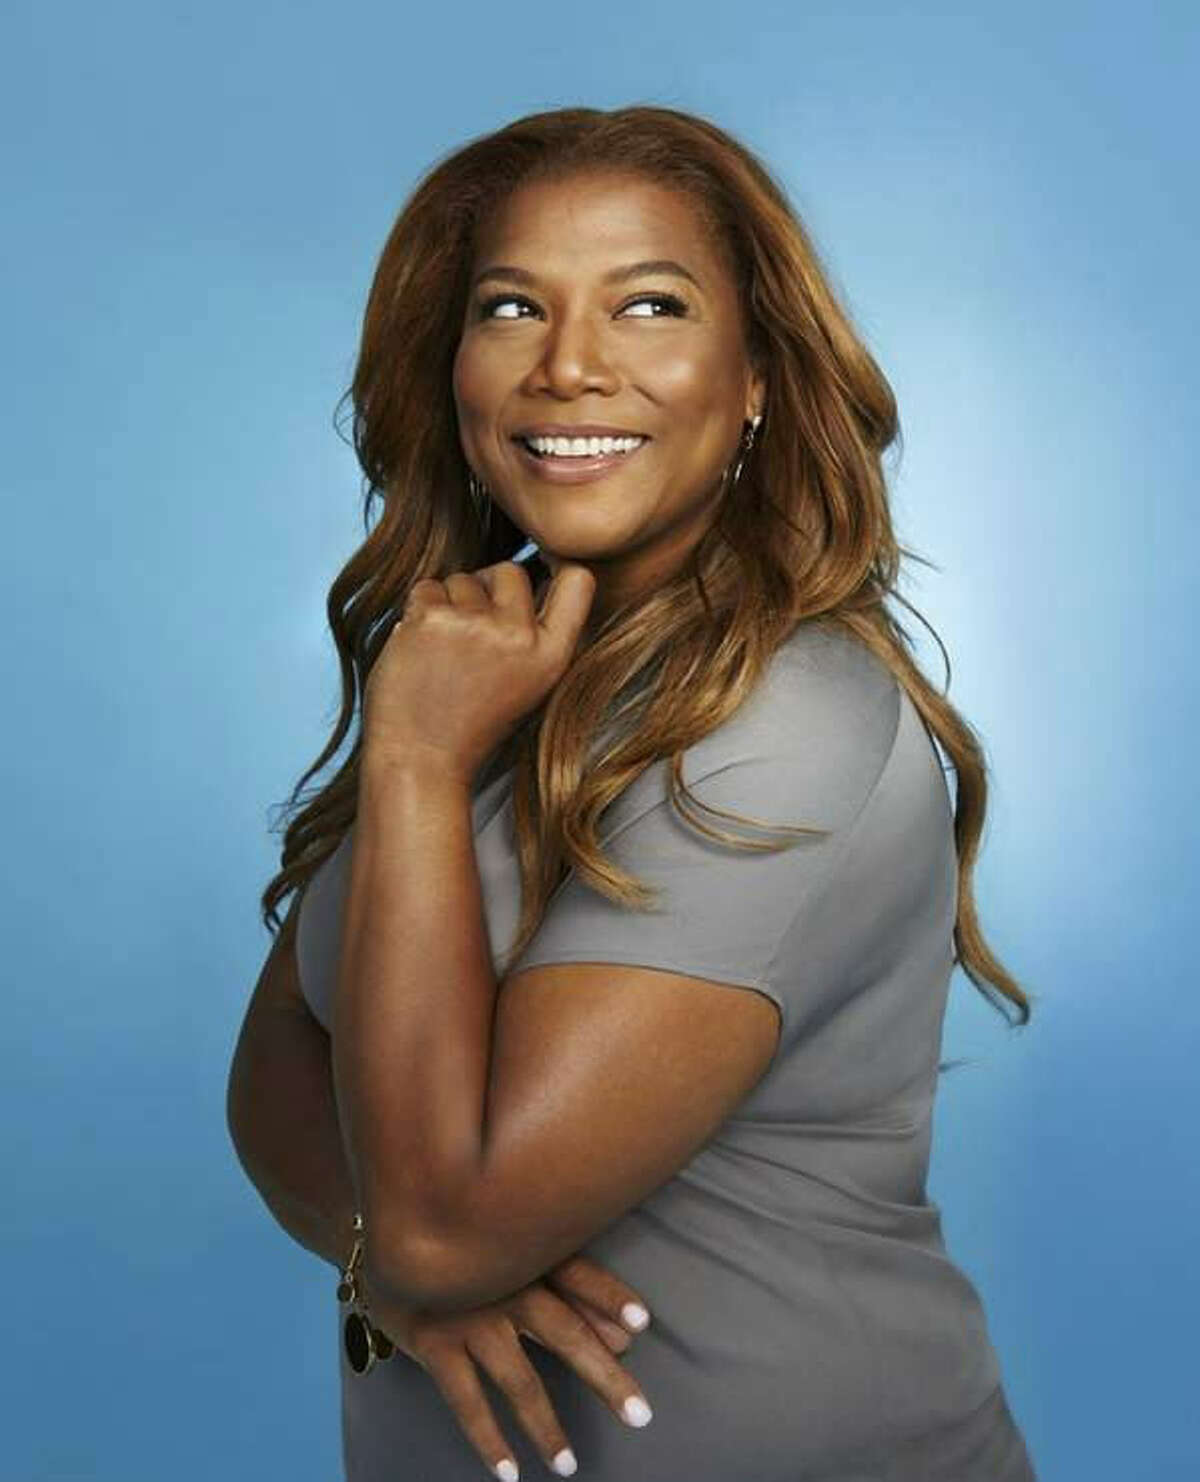 Queen Latifah is ready to reenter the talk show game